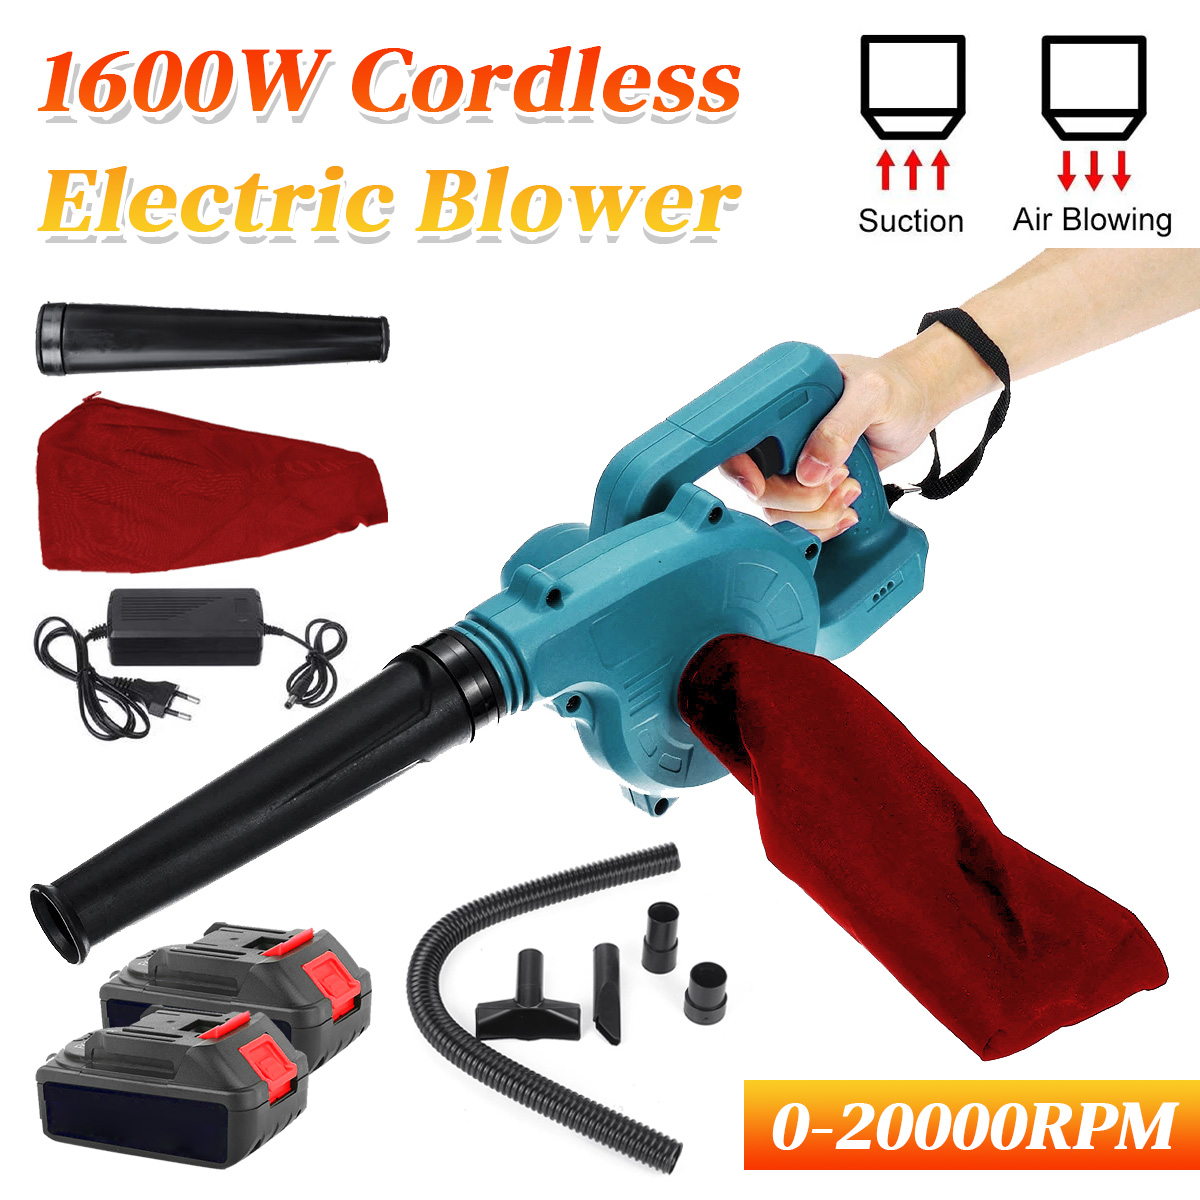 1600W-2-In-1-Cordless-Electric-Air-Blower-Dust-Leaf-Cleaner-Vacuum-Cleannig-Blowing-Tool-W-None12-Ba-1860307-4